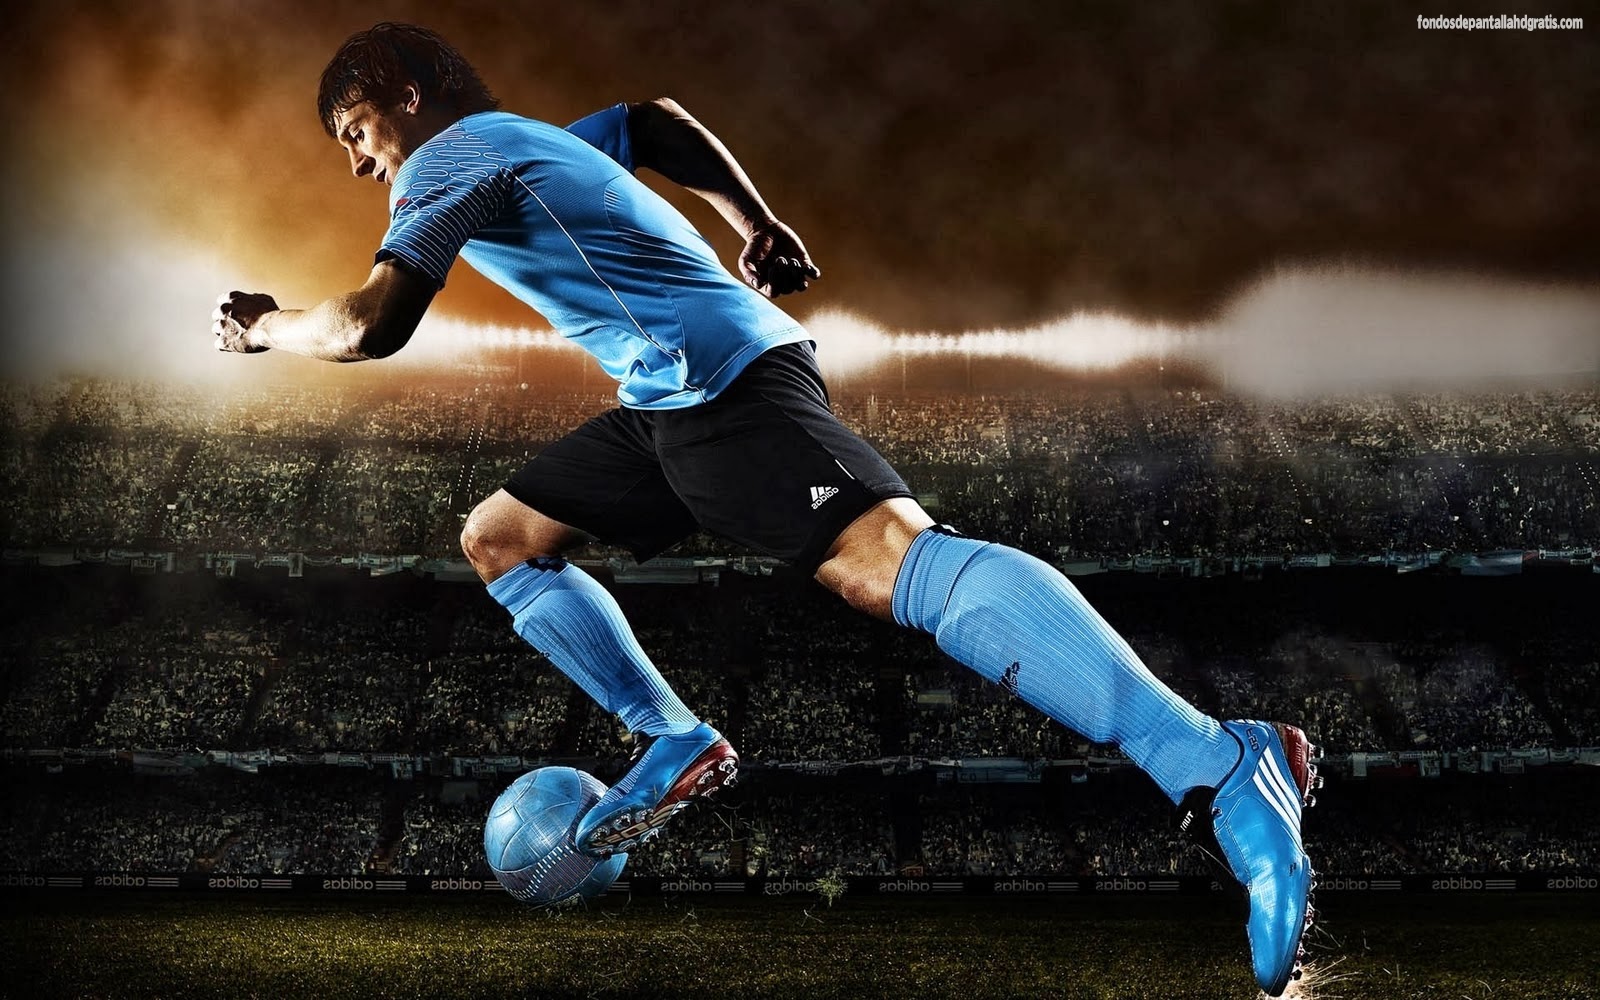 best rated wallpapers,football player,football,player,soccer player,soccer kick